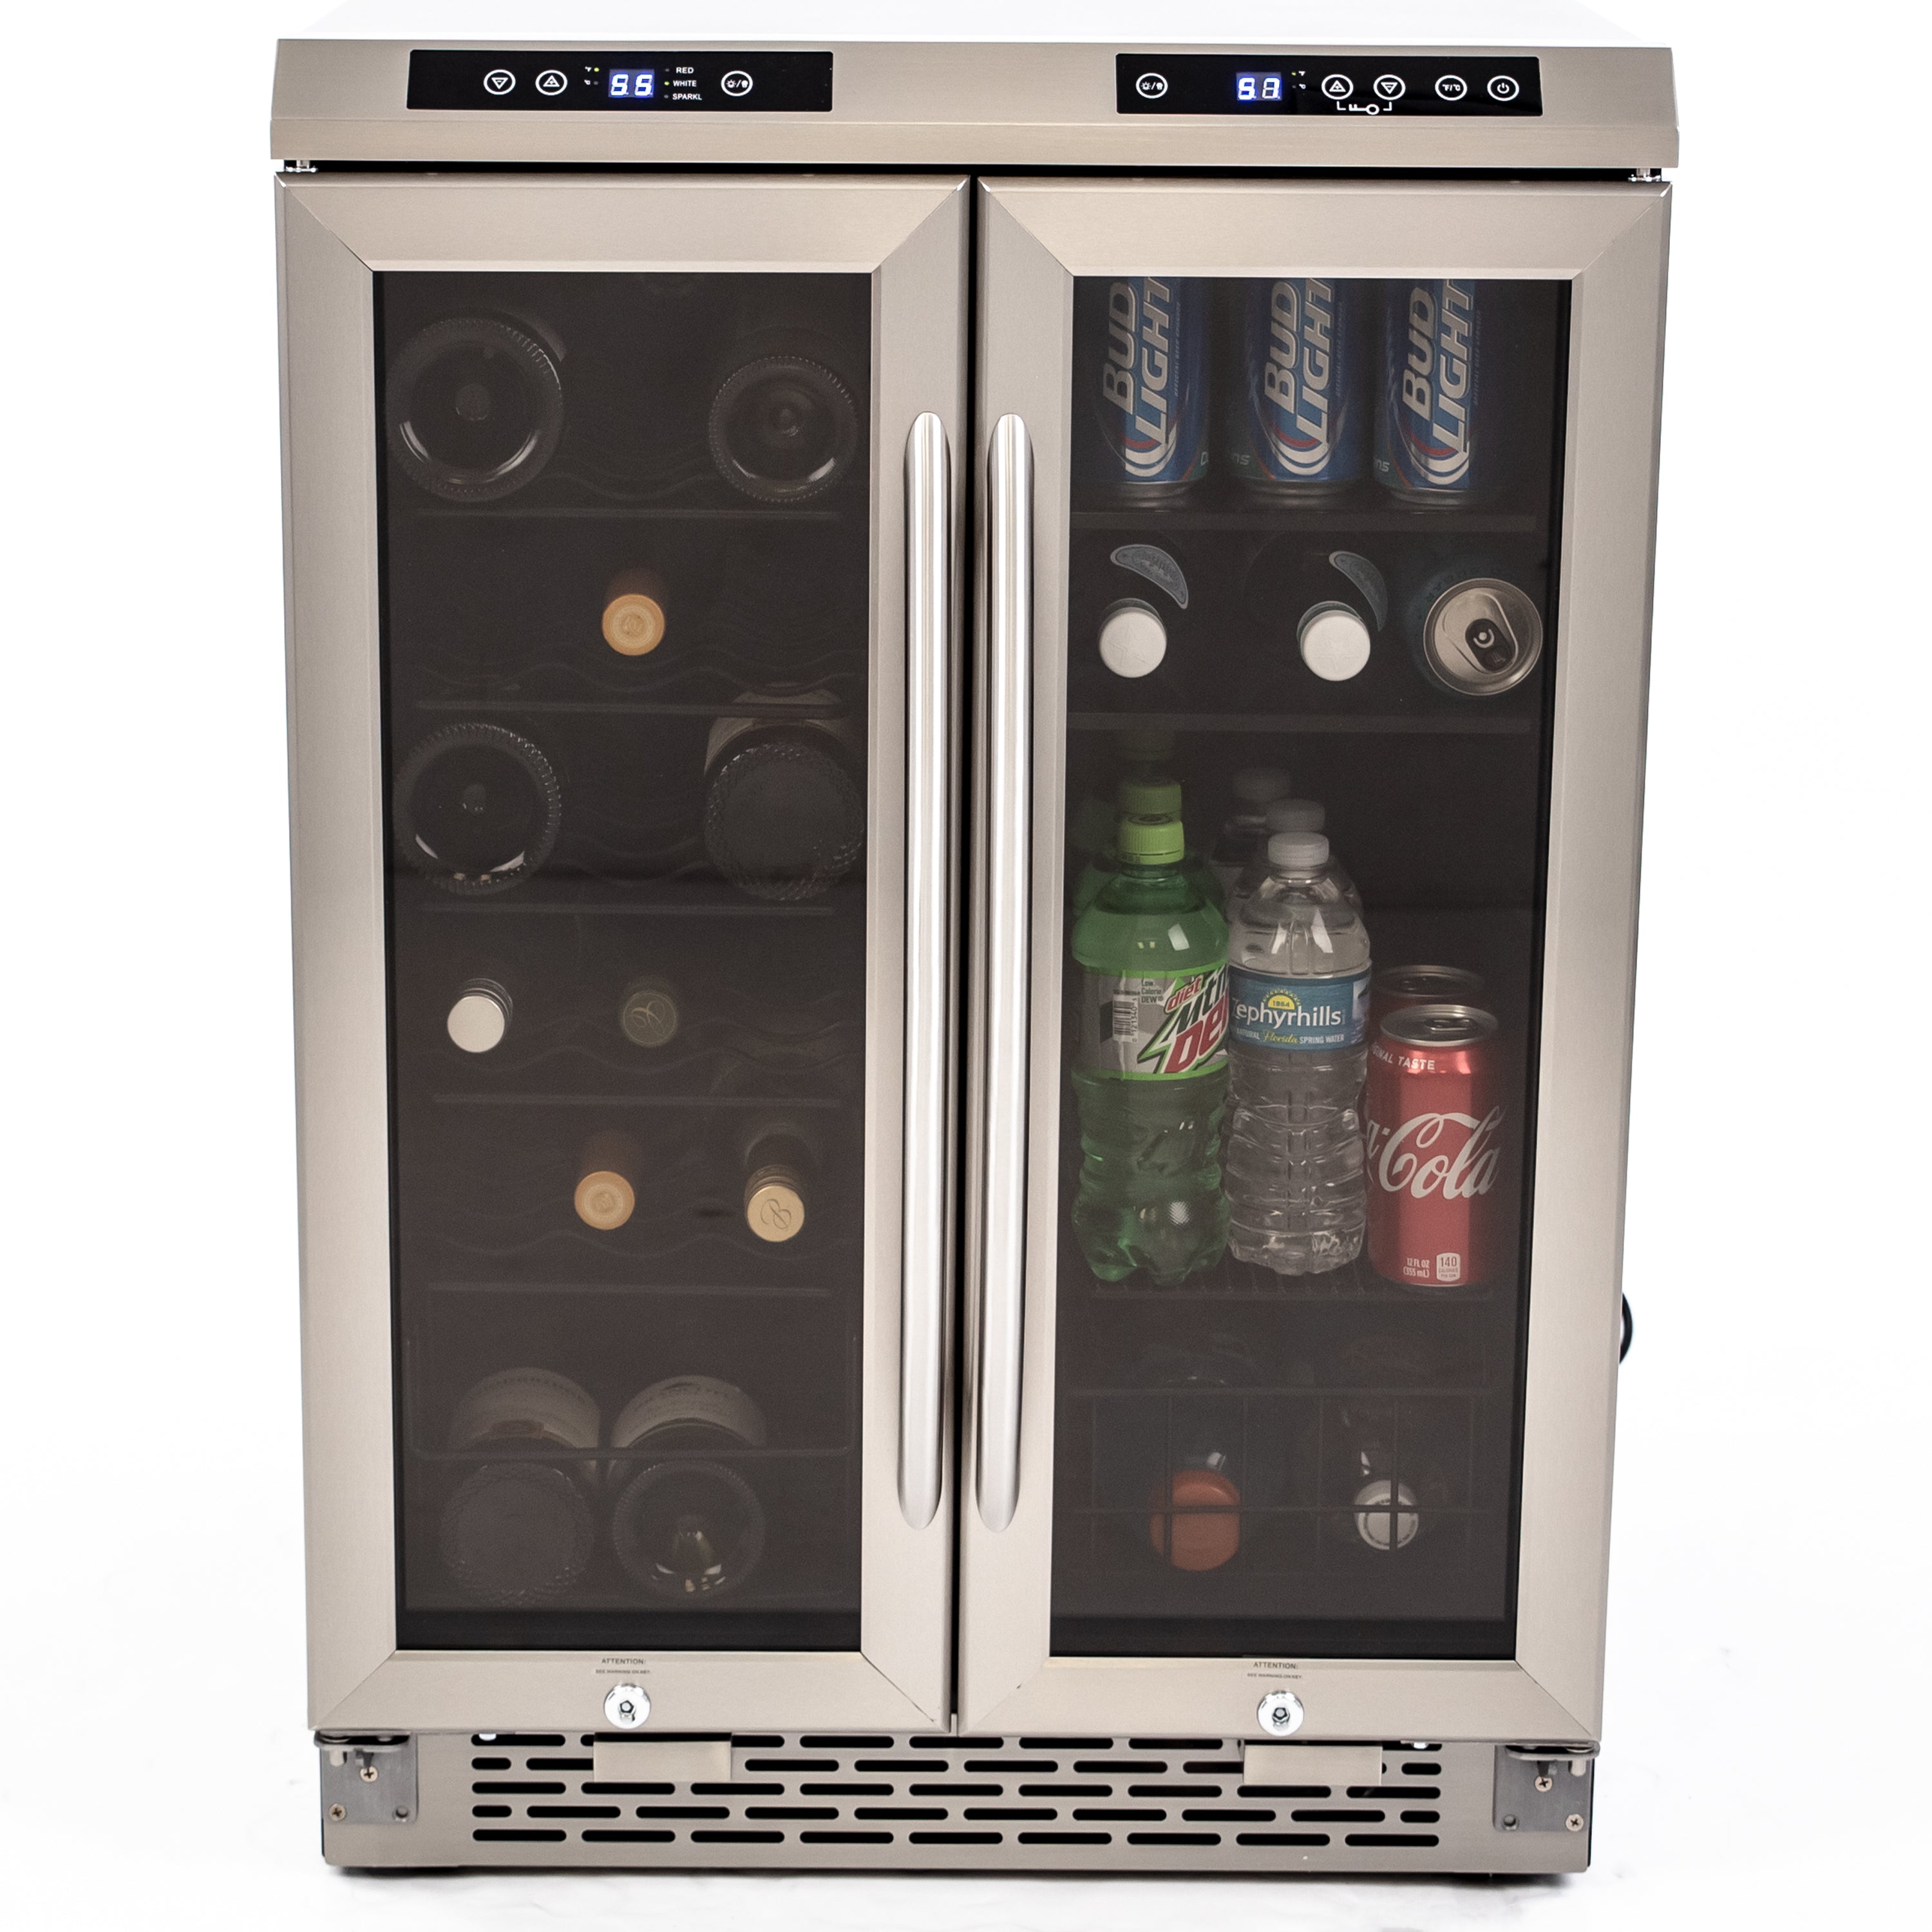 Avanti - WBV19DZ, Avanti Dual-Zone Wine and Beverage Center, 19 Bottle/66 Can Capacity, in Stainless Steel